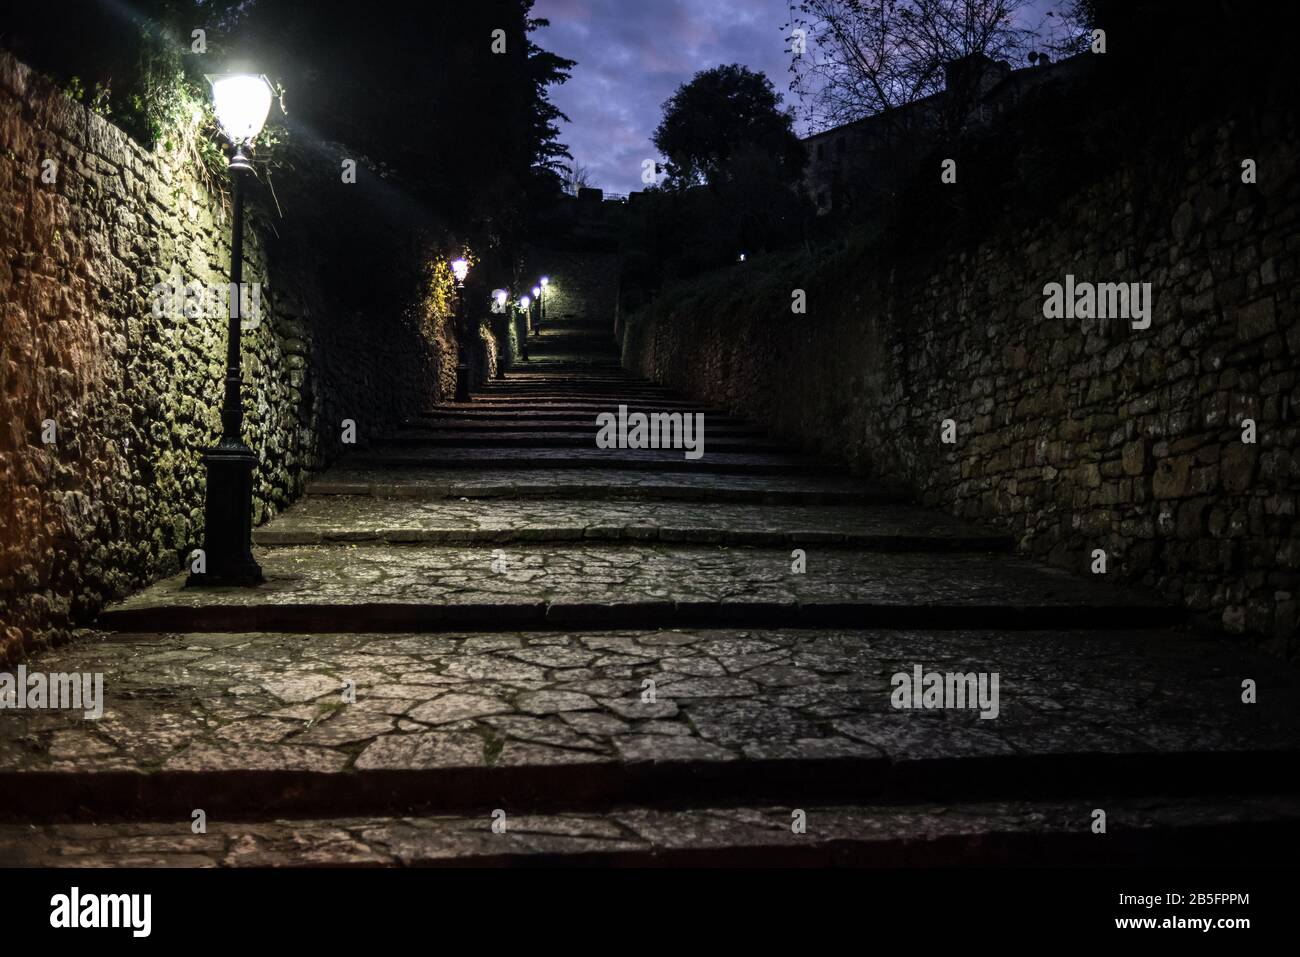 Dark medieval cobbled alley at night with several street lamps providing light Stock Photo